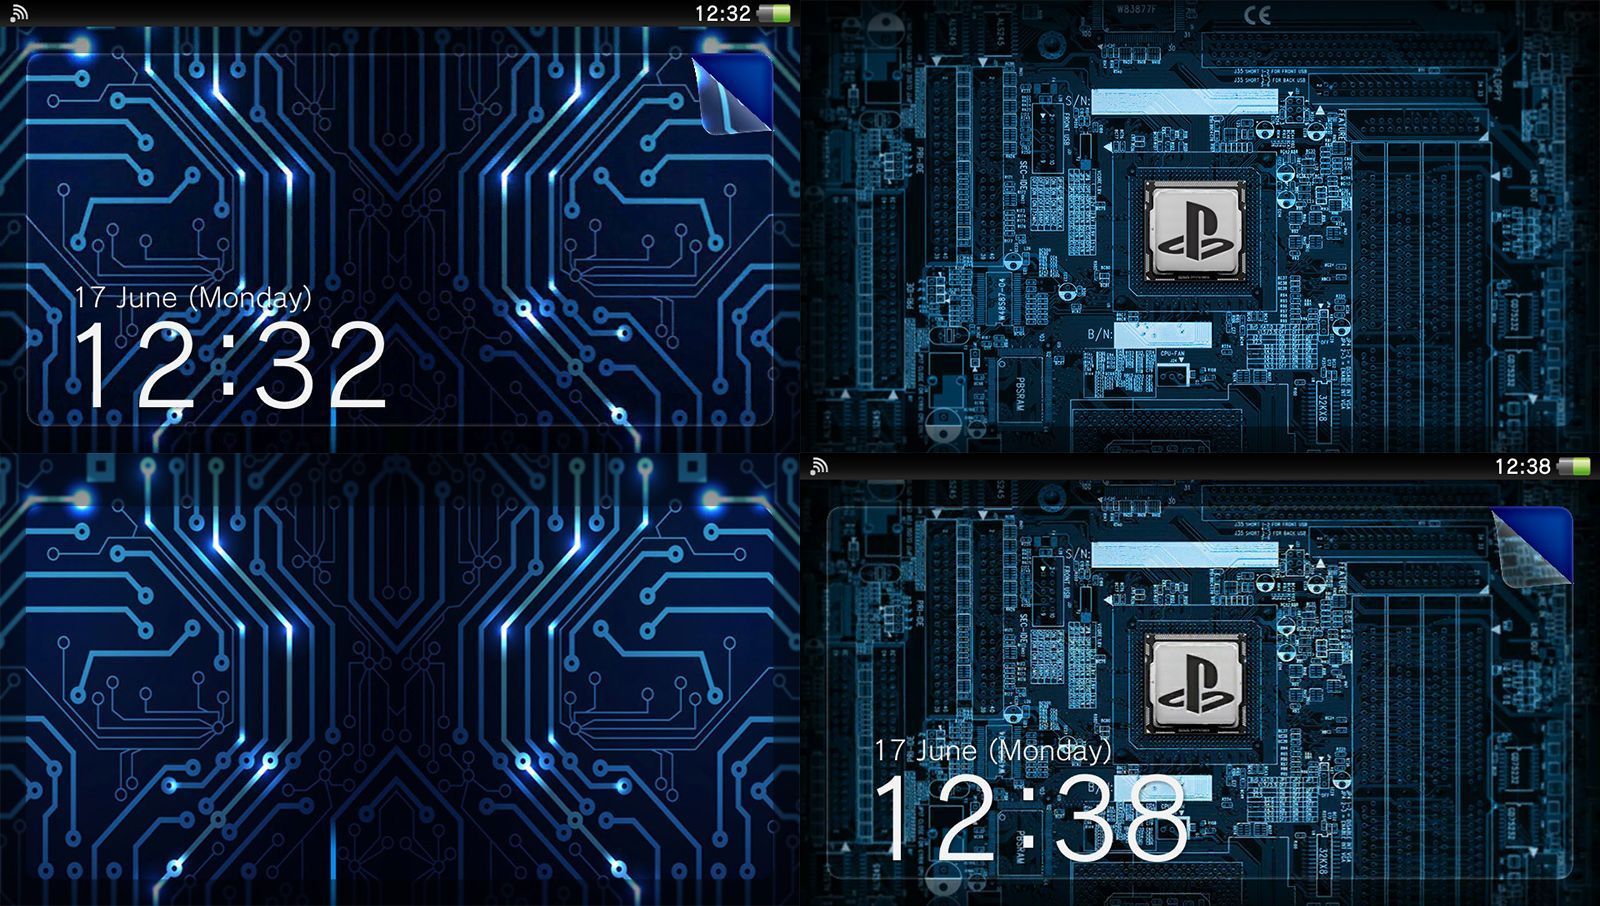 Gallery for - how to make custom ps vita wallpapers